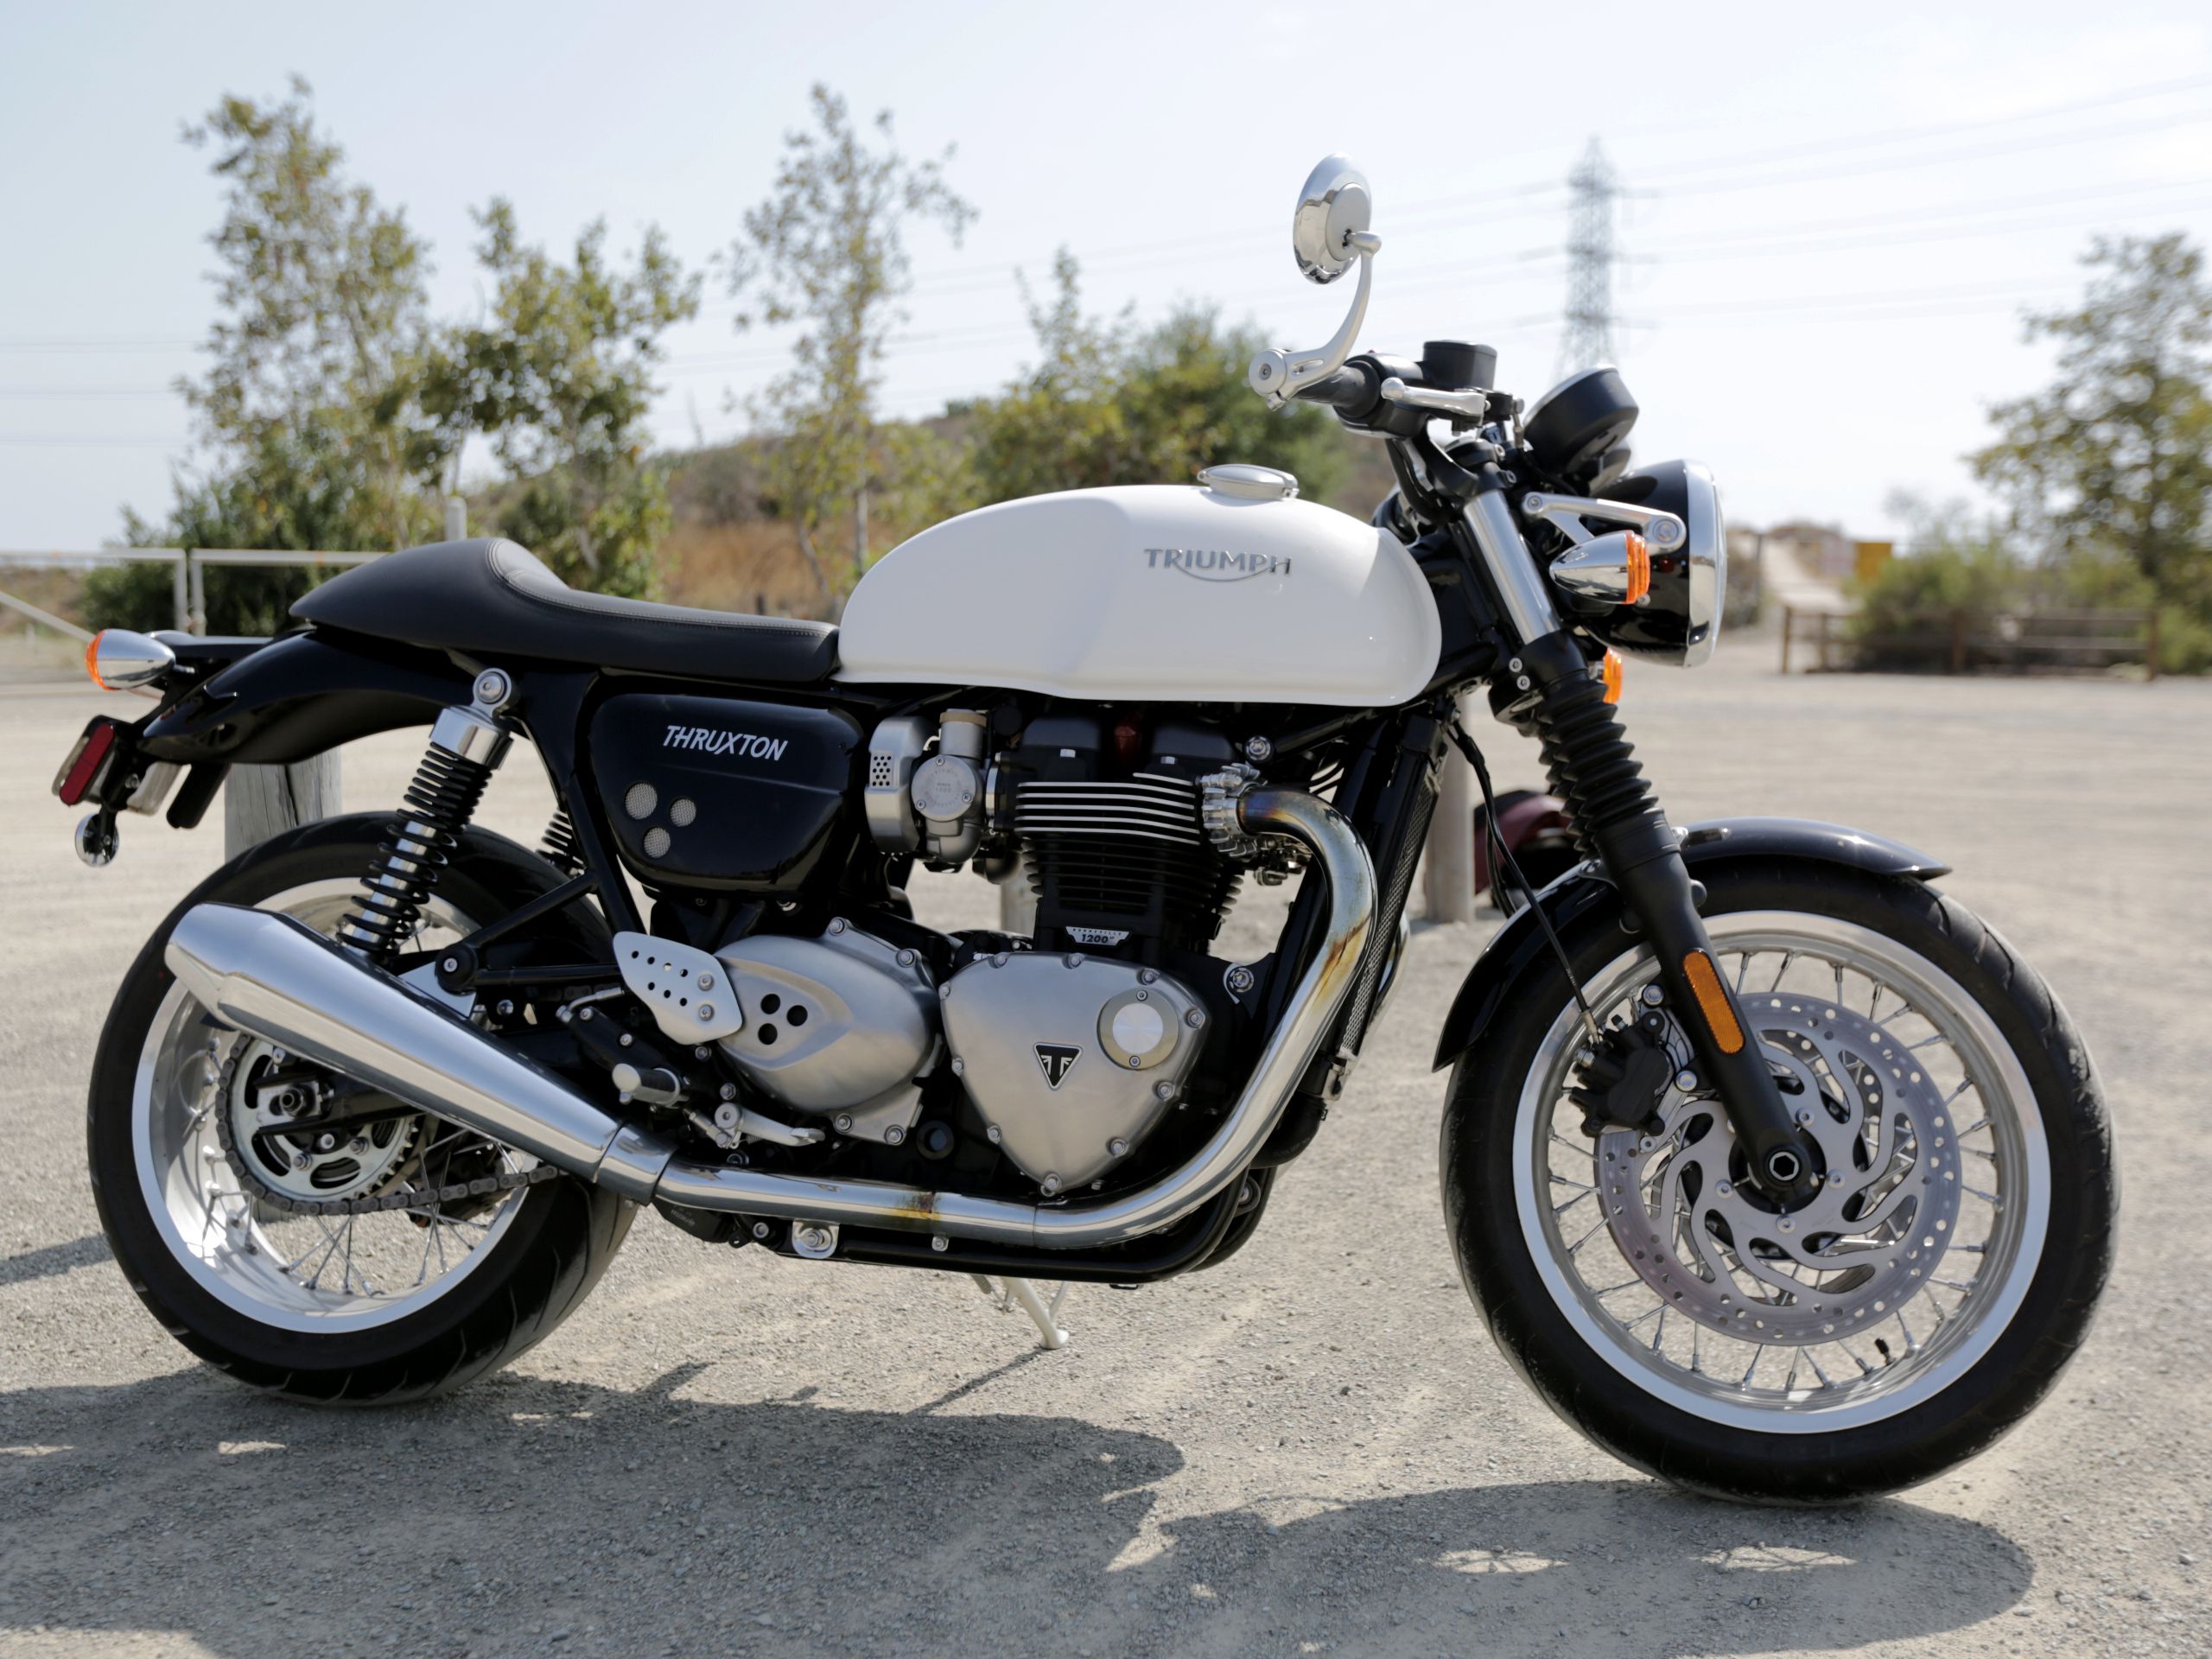 2017 Triumph Thruxton First Ride Review Motorcycle Cruiser